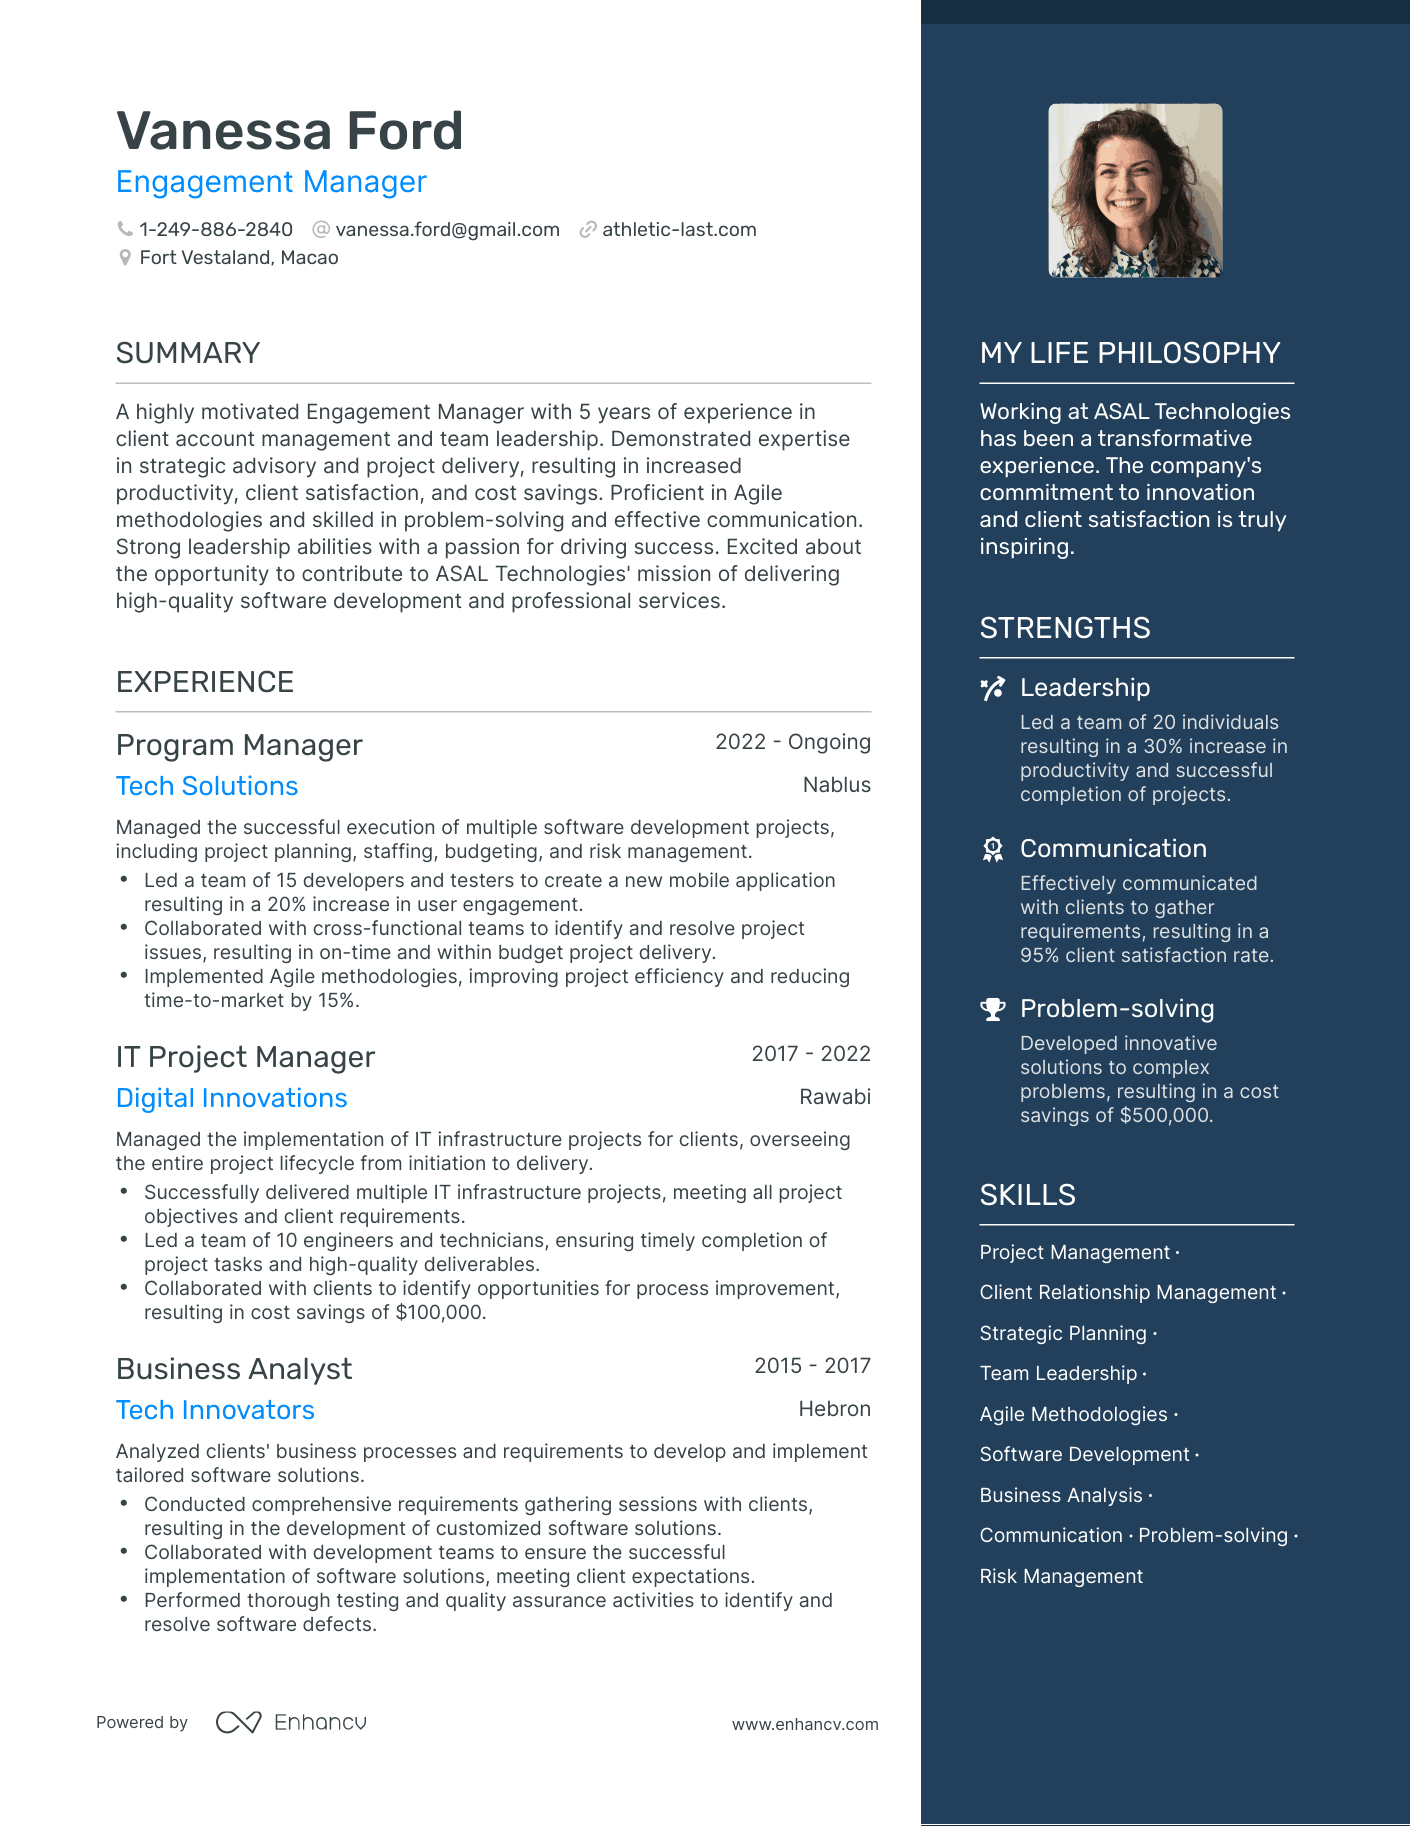 Engagement Manager resume example